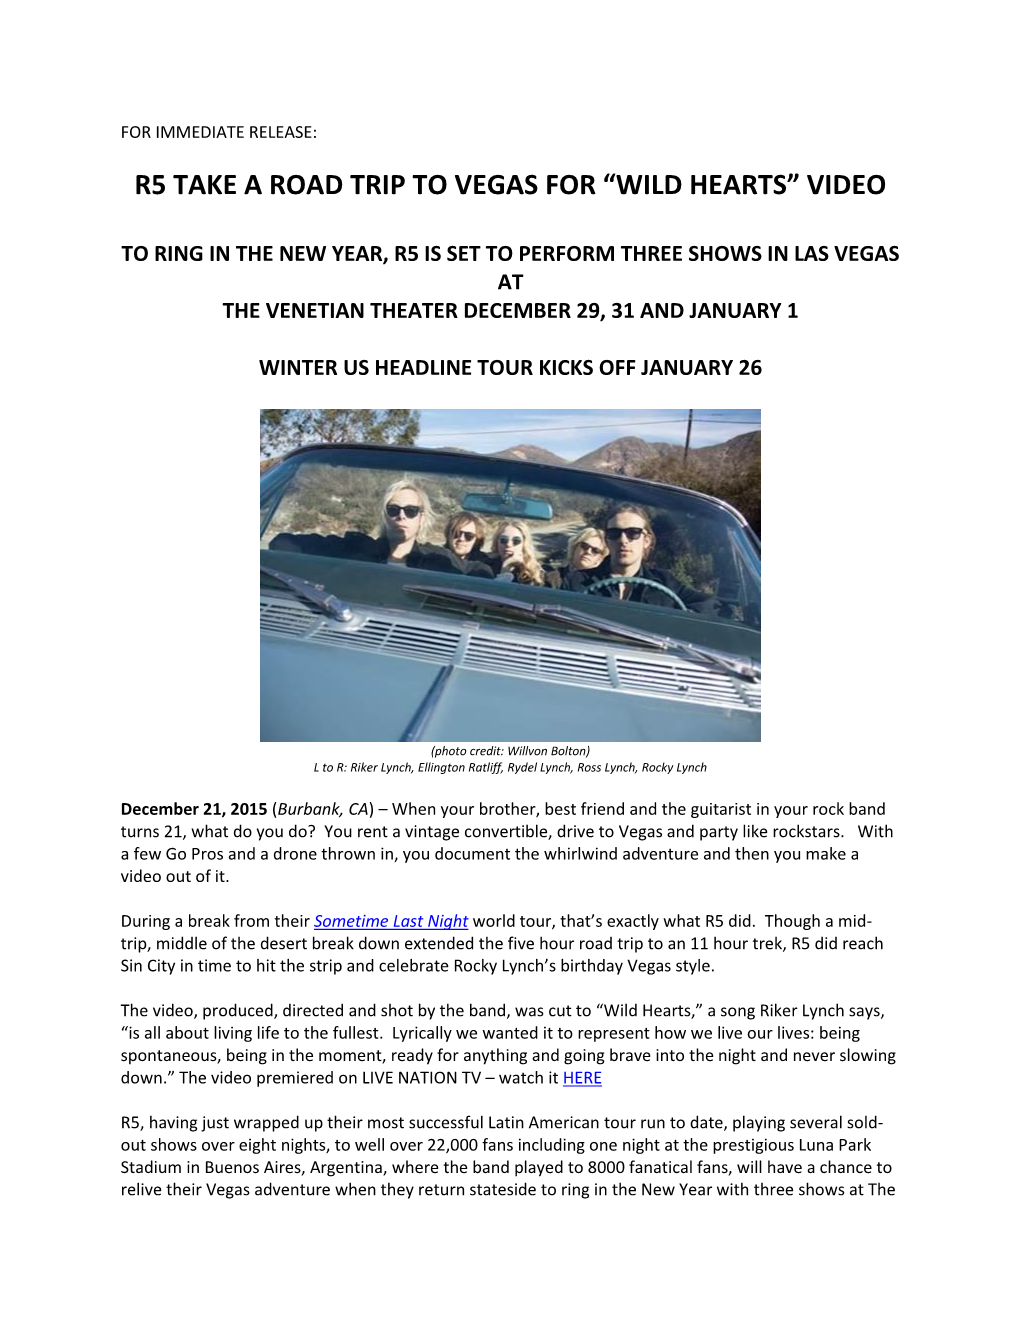 R5 Take a Road Trip to Vegas for “Wild Hearts” Video